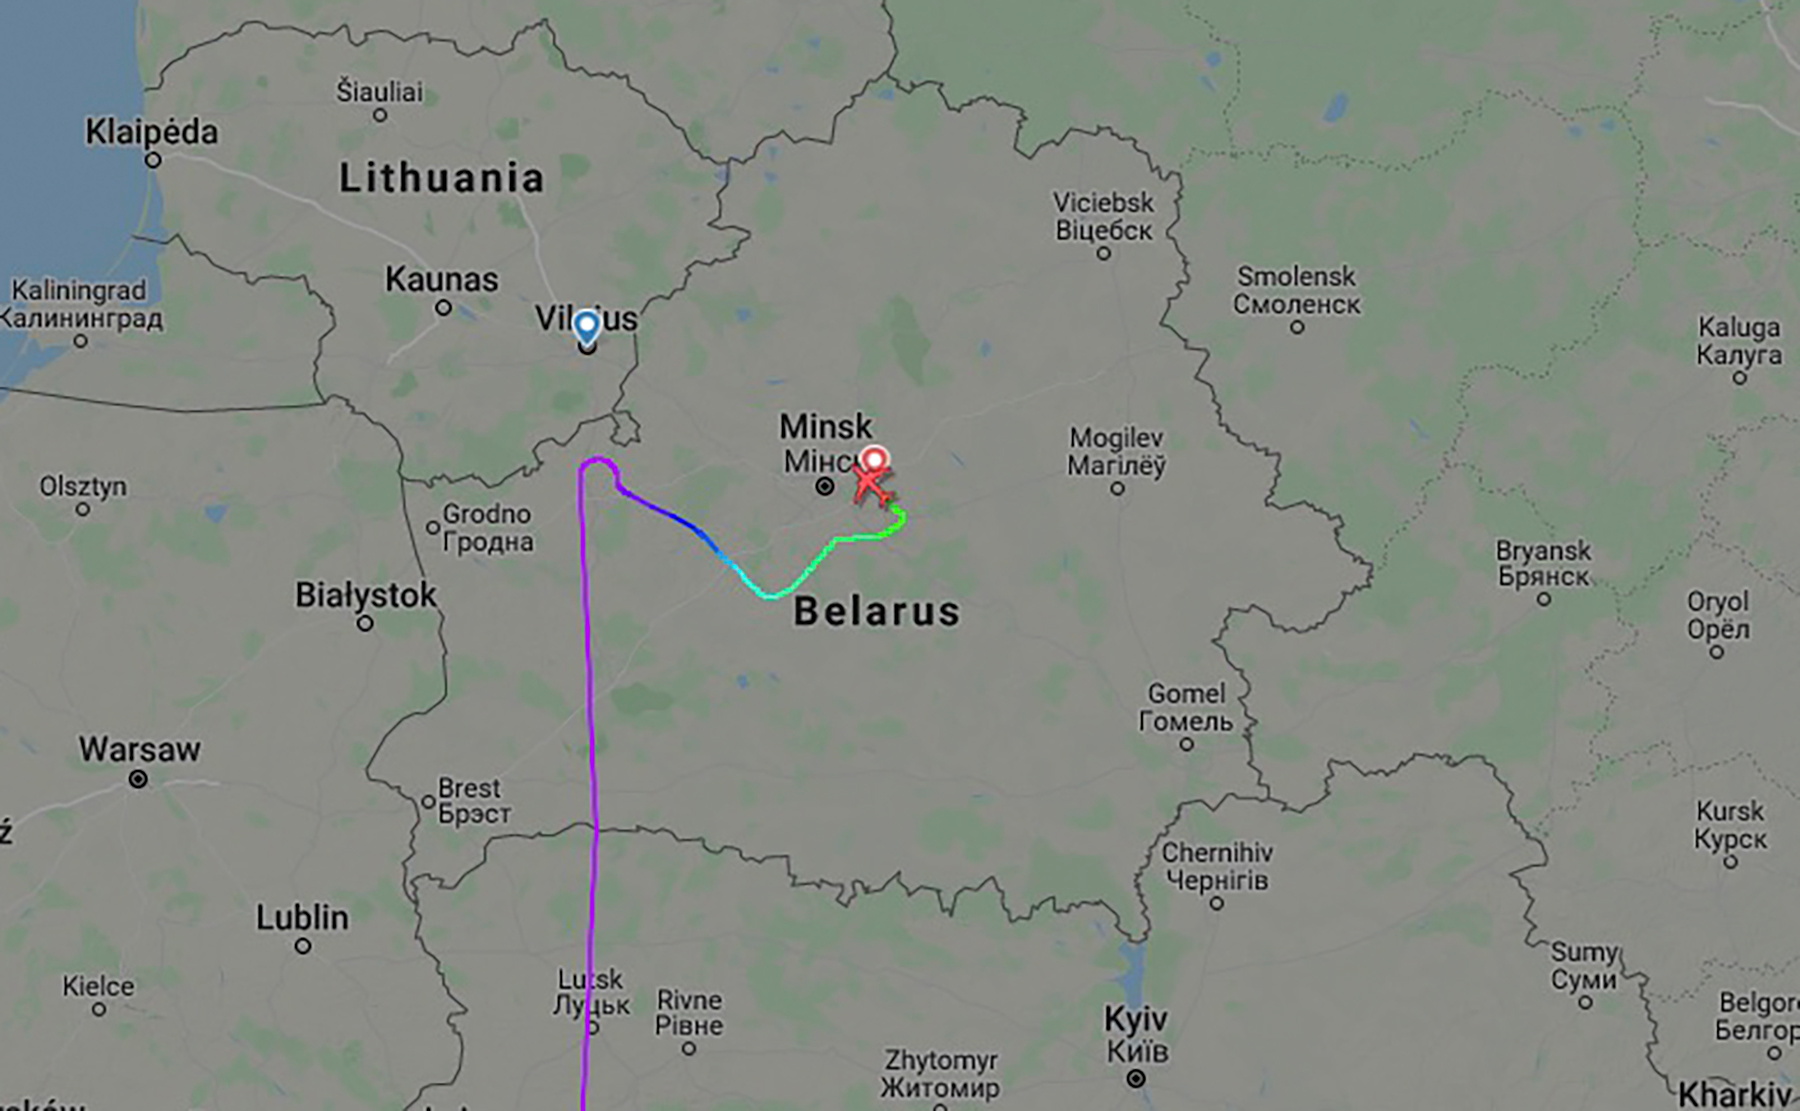 An animated graphic shows the flightpath of Ryanair Flight 4978 diverting and landing in Minsk